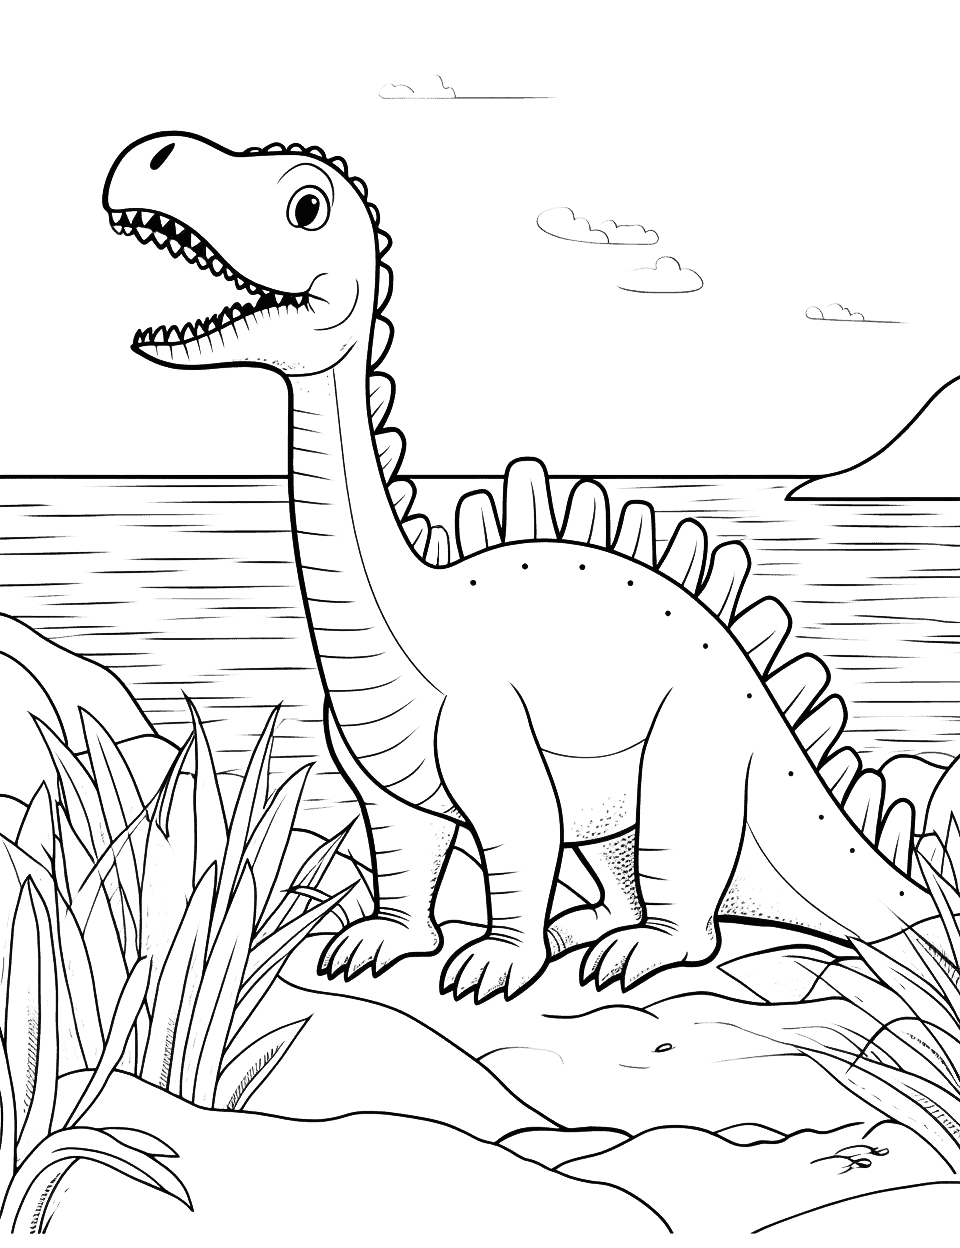 Spinosaurus on the Shore Coloring Page - A Spinosaurus looking out over the sea, looking for fish to eat.